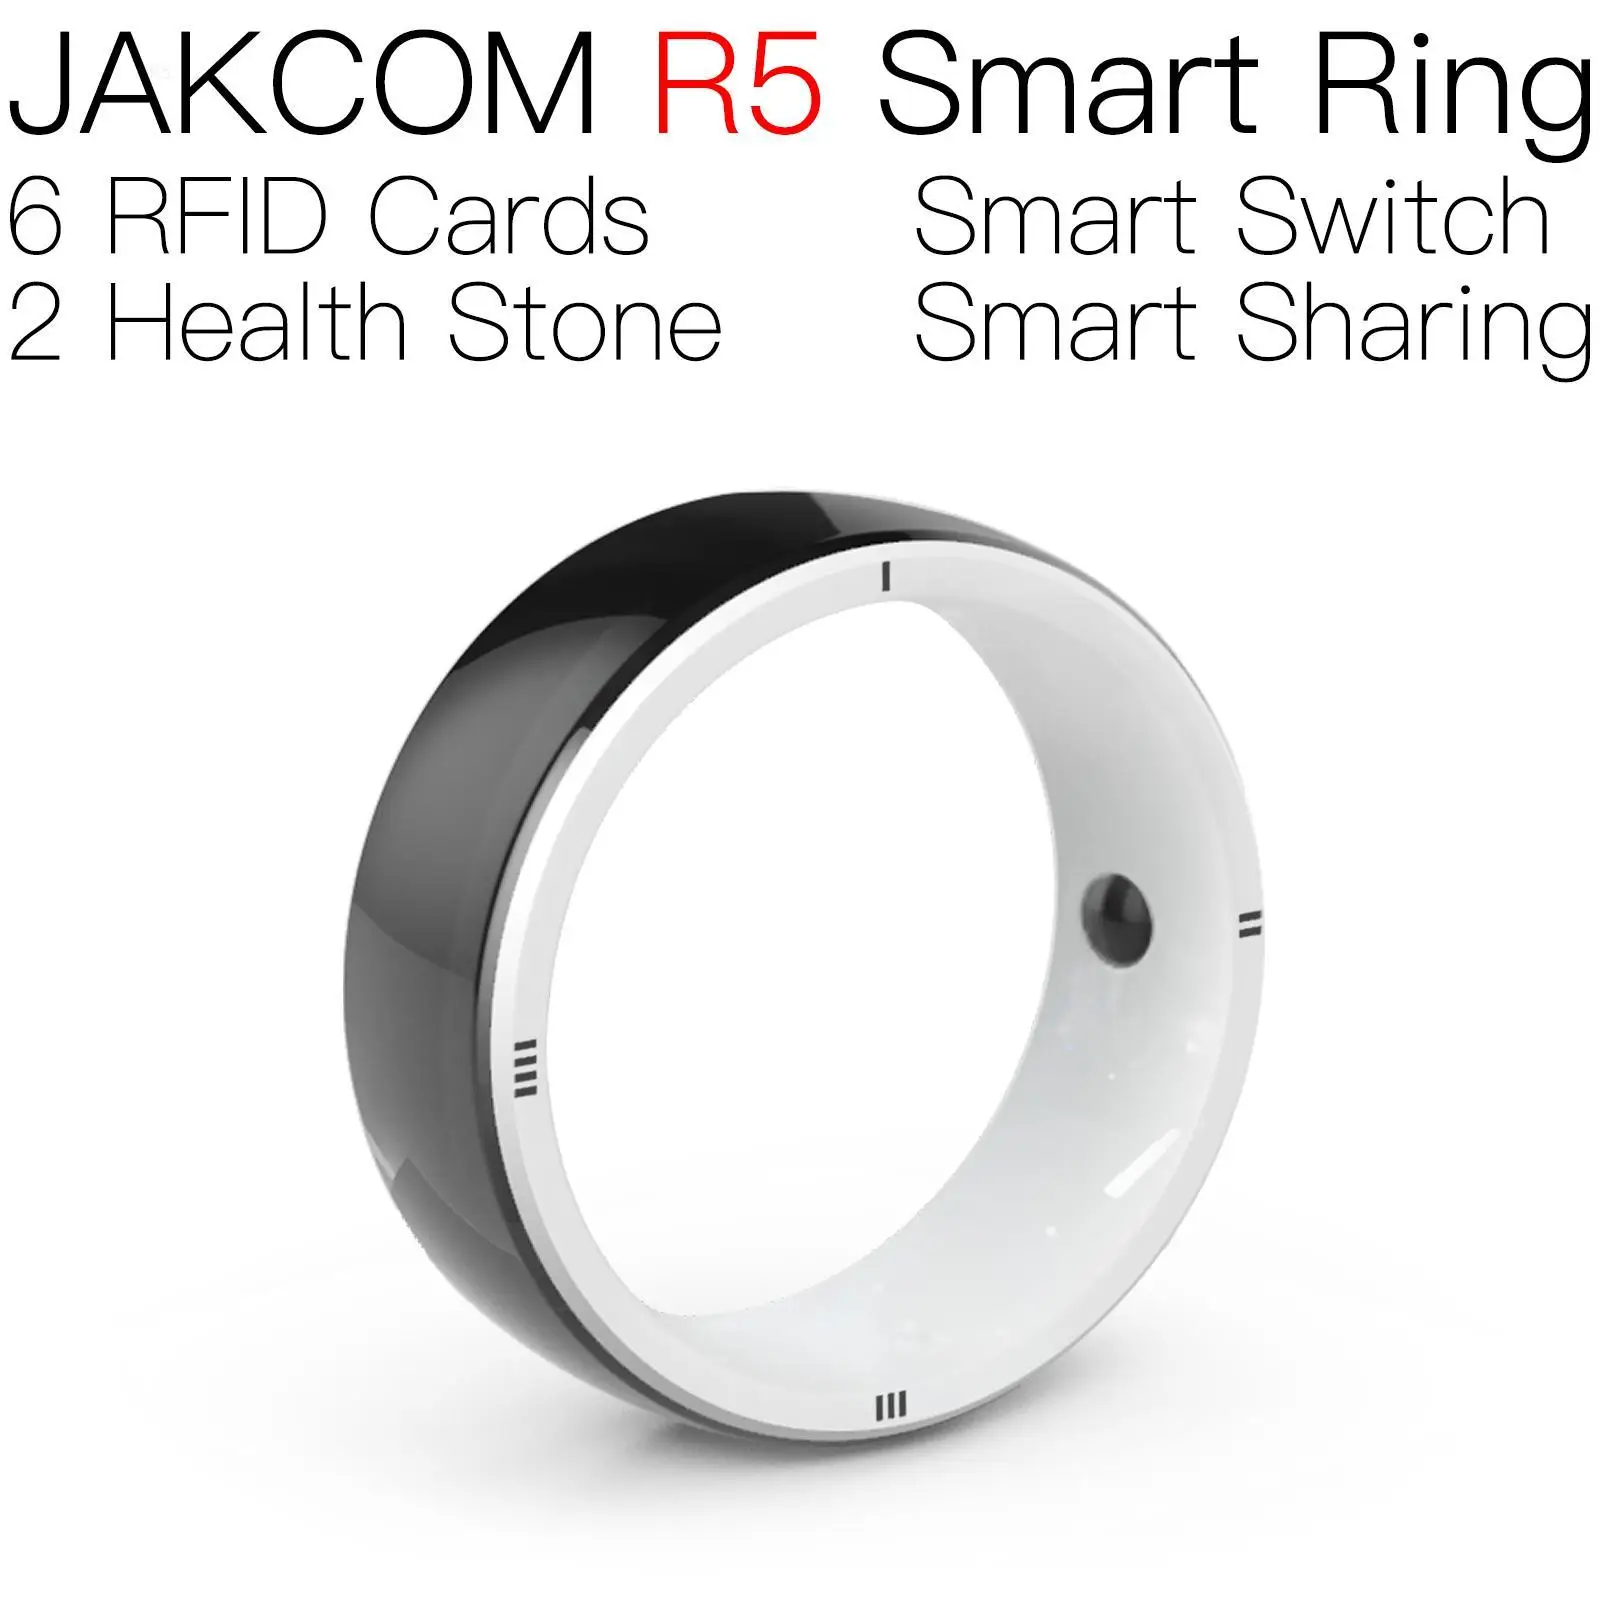 

JAKCOM R5 Smart Ring Super value than swipping card ldv t60 chip sticker vanch rfid tags shengzao official store maker